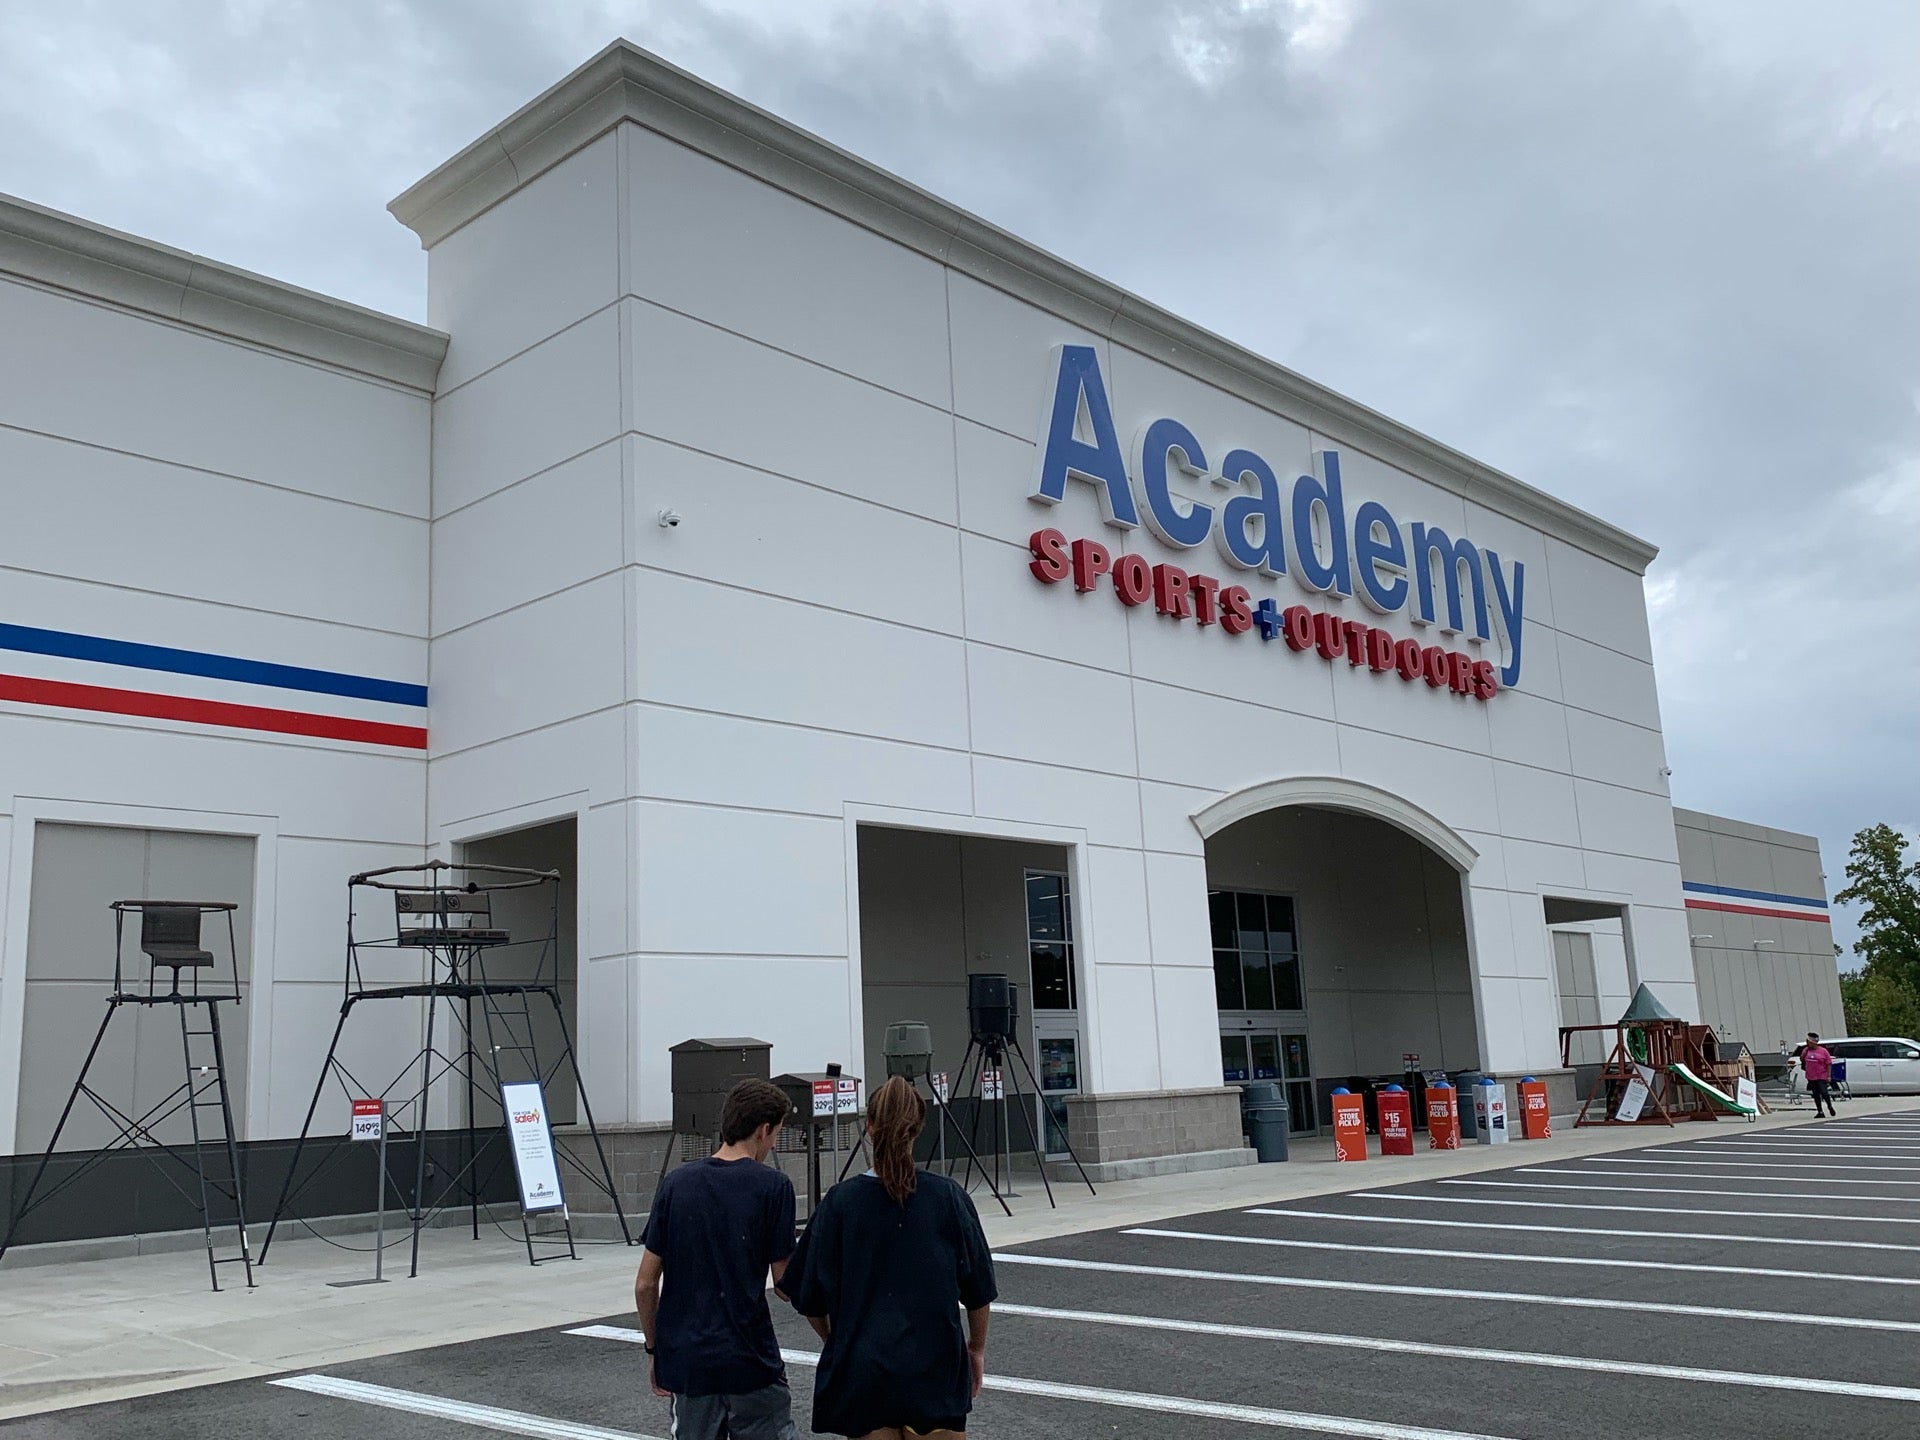 Academy Sports + Outdoors, Quality Sporting Goods